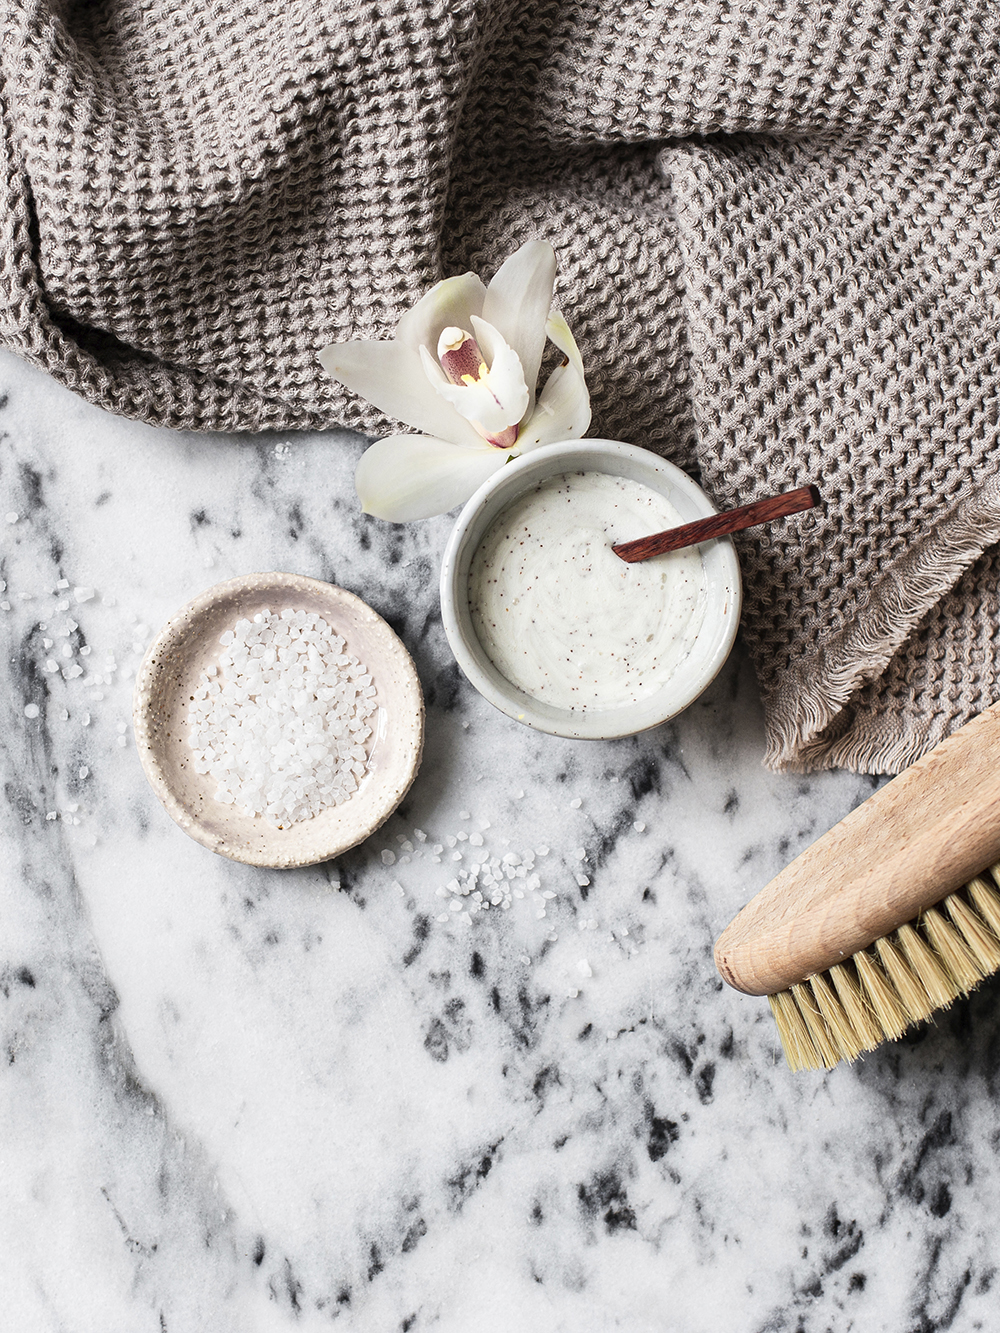 5 Tips for How to Exfoliate Skin Naturally